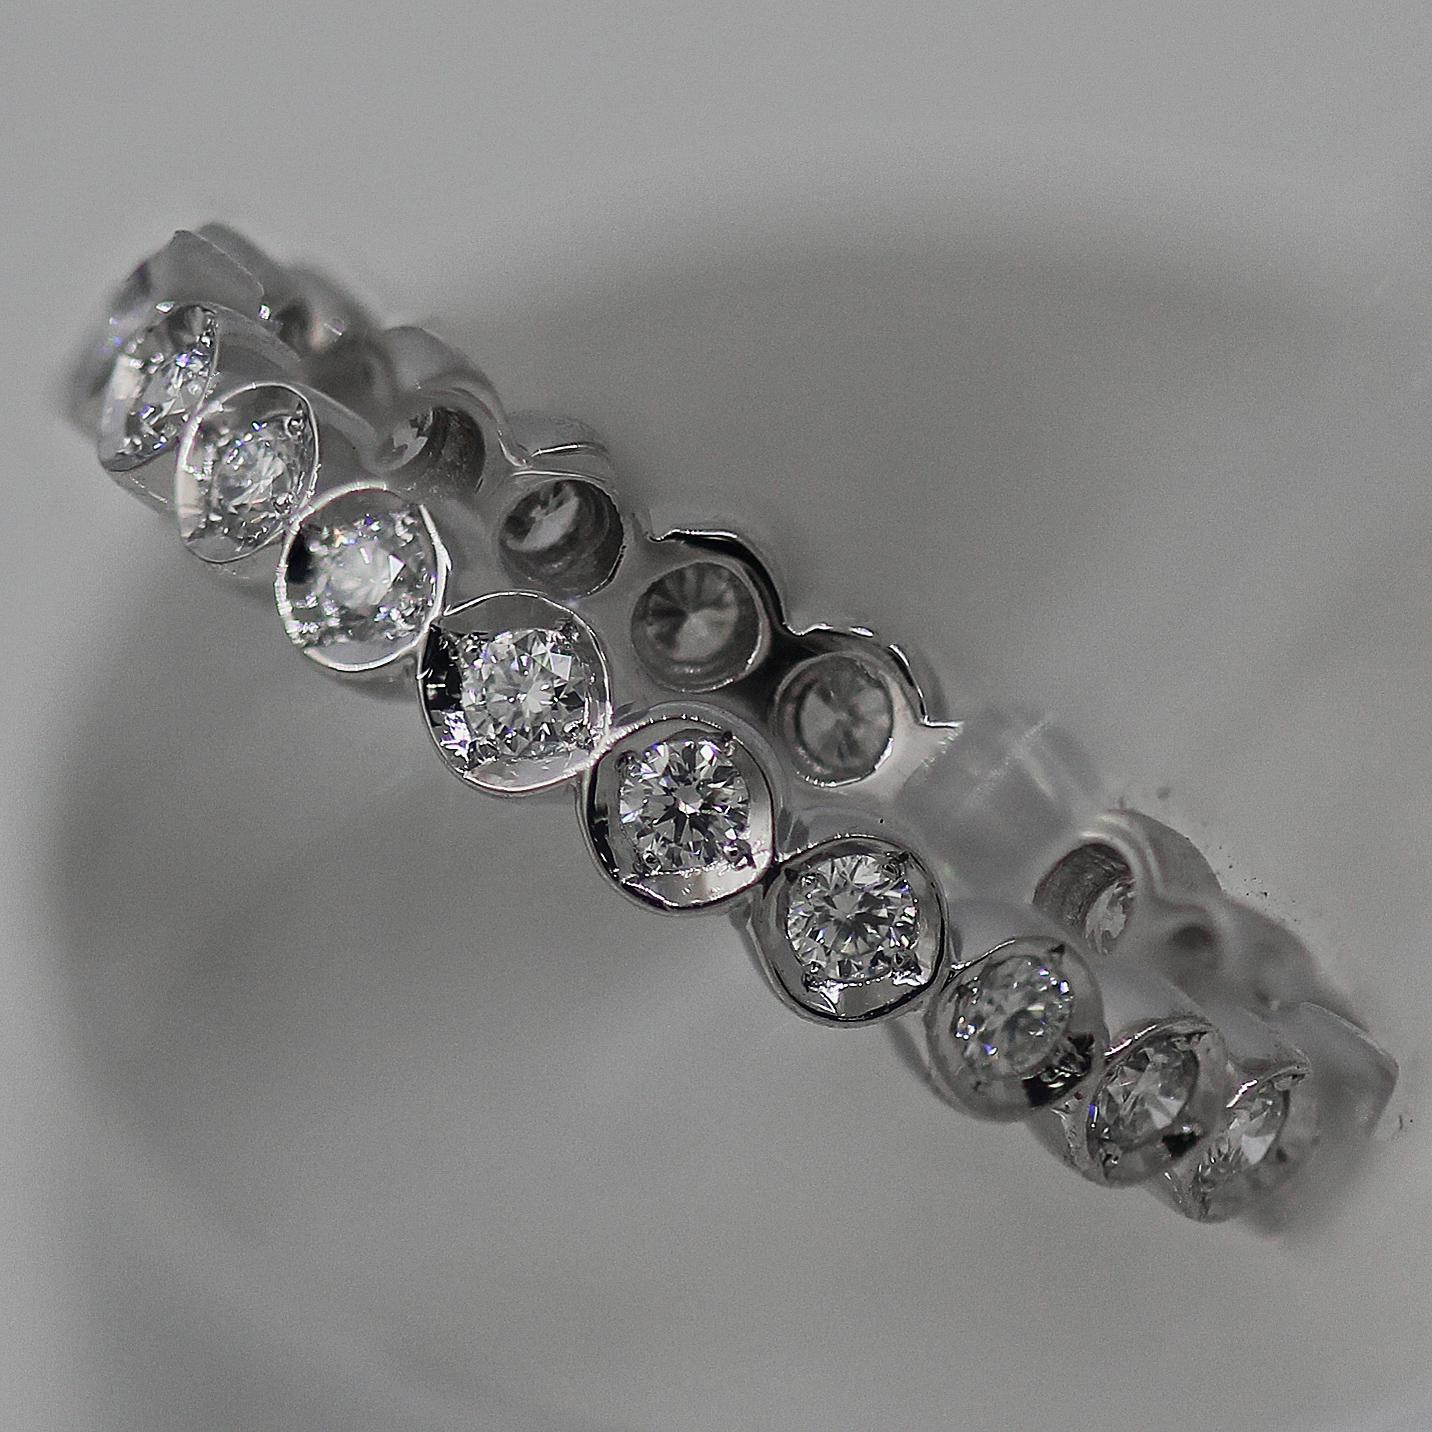 Made to order, please allow 2-5 weeks.

Retail Price : $4,000.00
 
Round Bezel Set Diamond Wedding / Eternity Band 0.4 CTW F-G Color VS - SI Clarity

Perfectly Set Diamonds 1.5mm each
White natural diamonds no treatment (F-H Color VS-SI